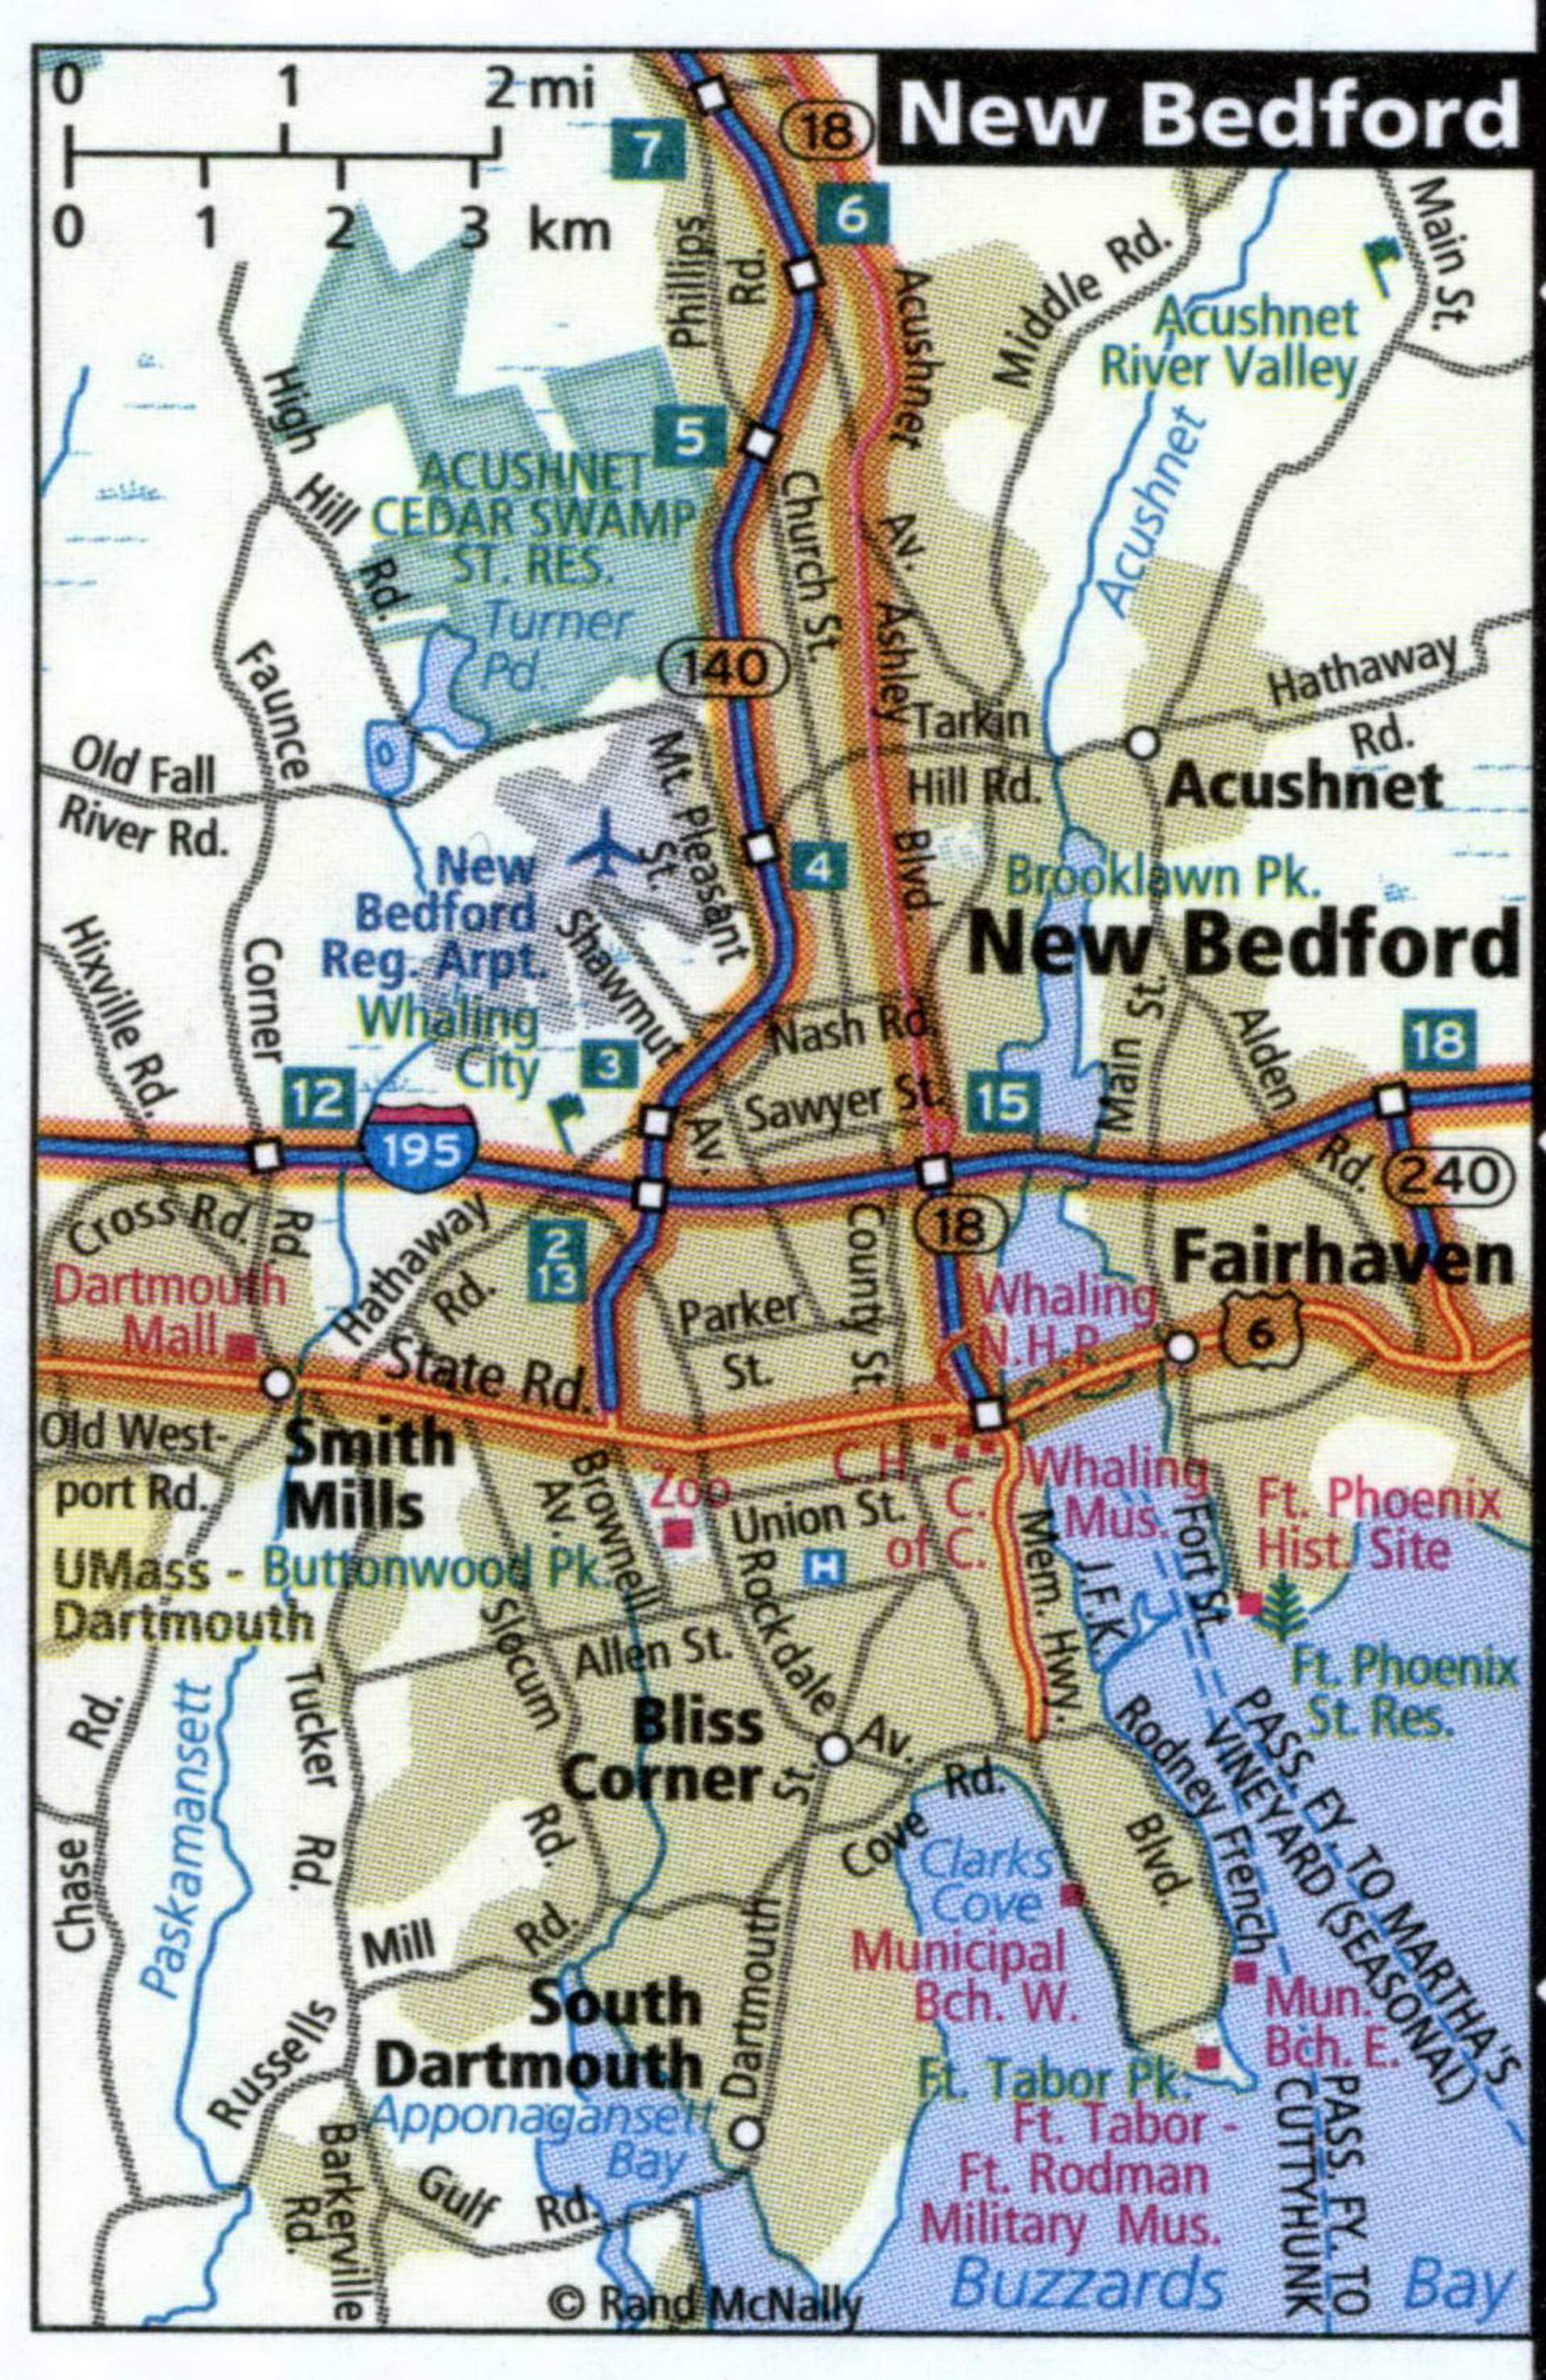 New Bedford map for truckers